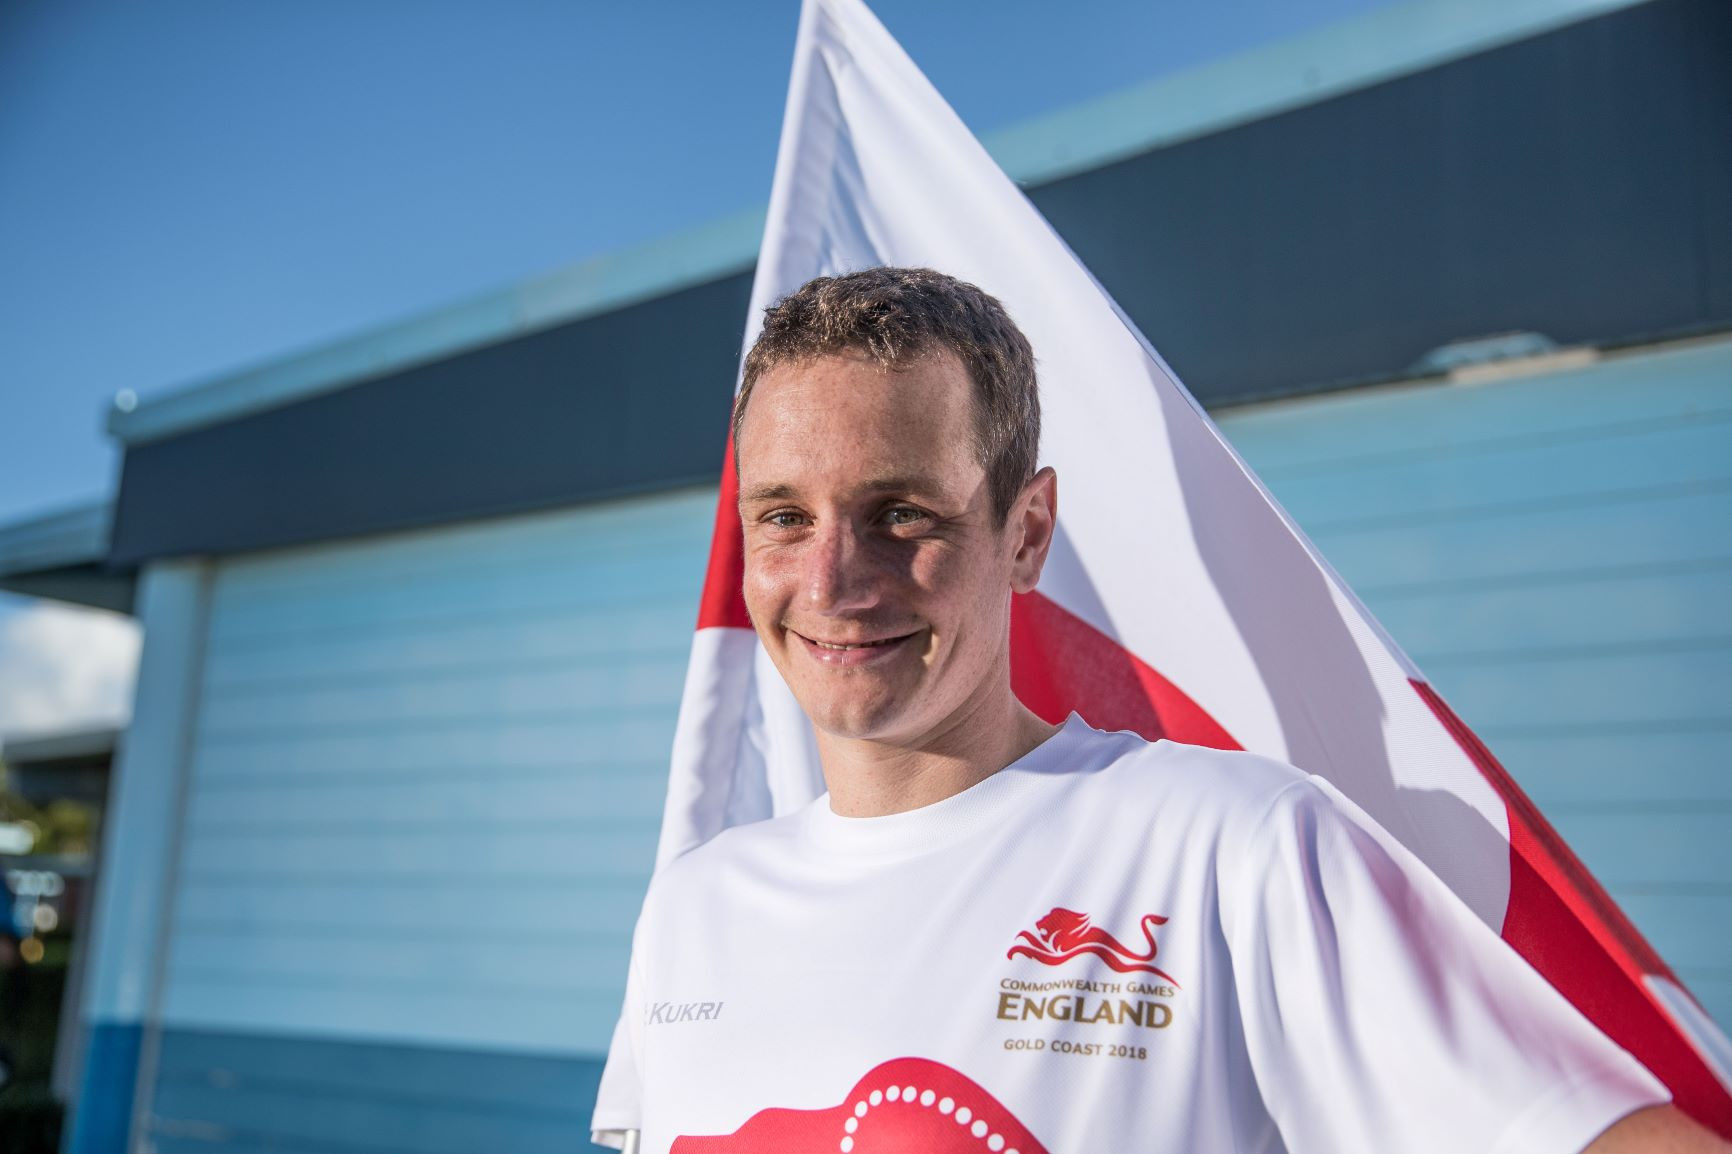 Double Olympic triathlon gold medallist Alistair Brownlee heads the names announced for the Birmingham 2022 Athletes' Advisory Committee ©CGE